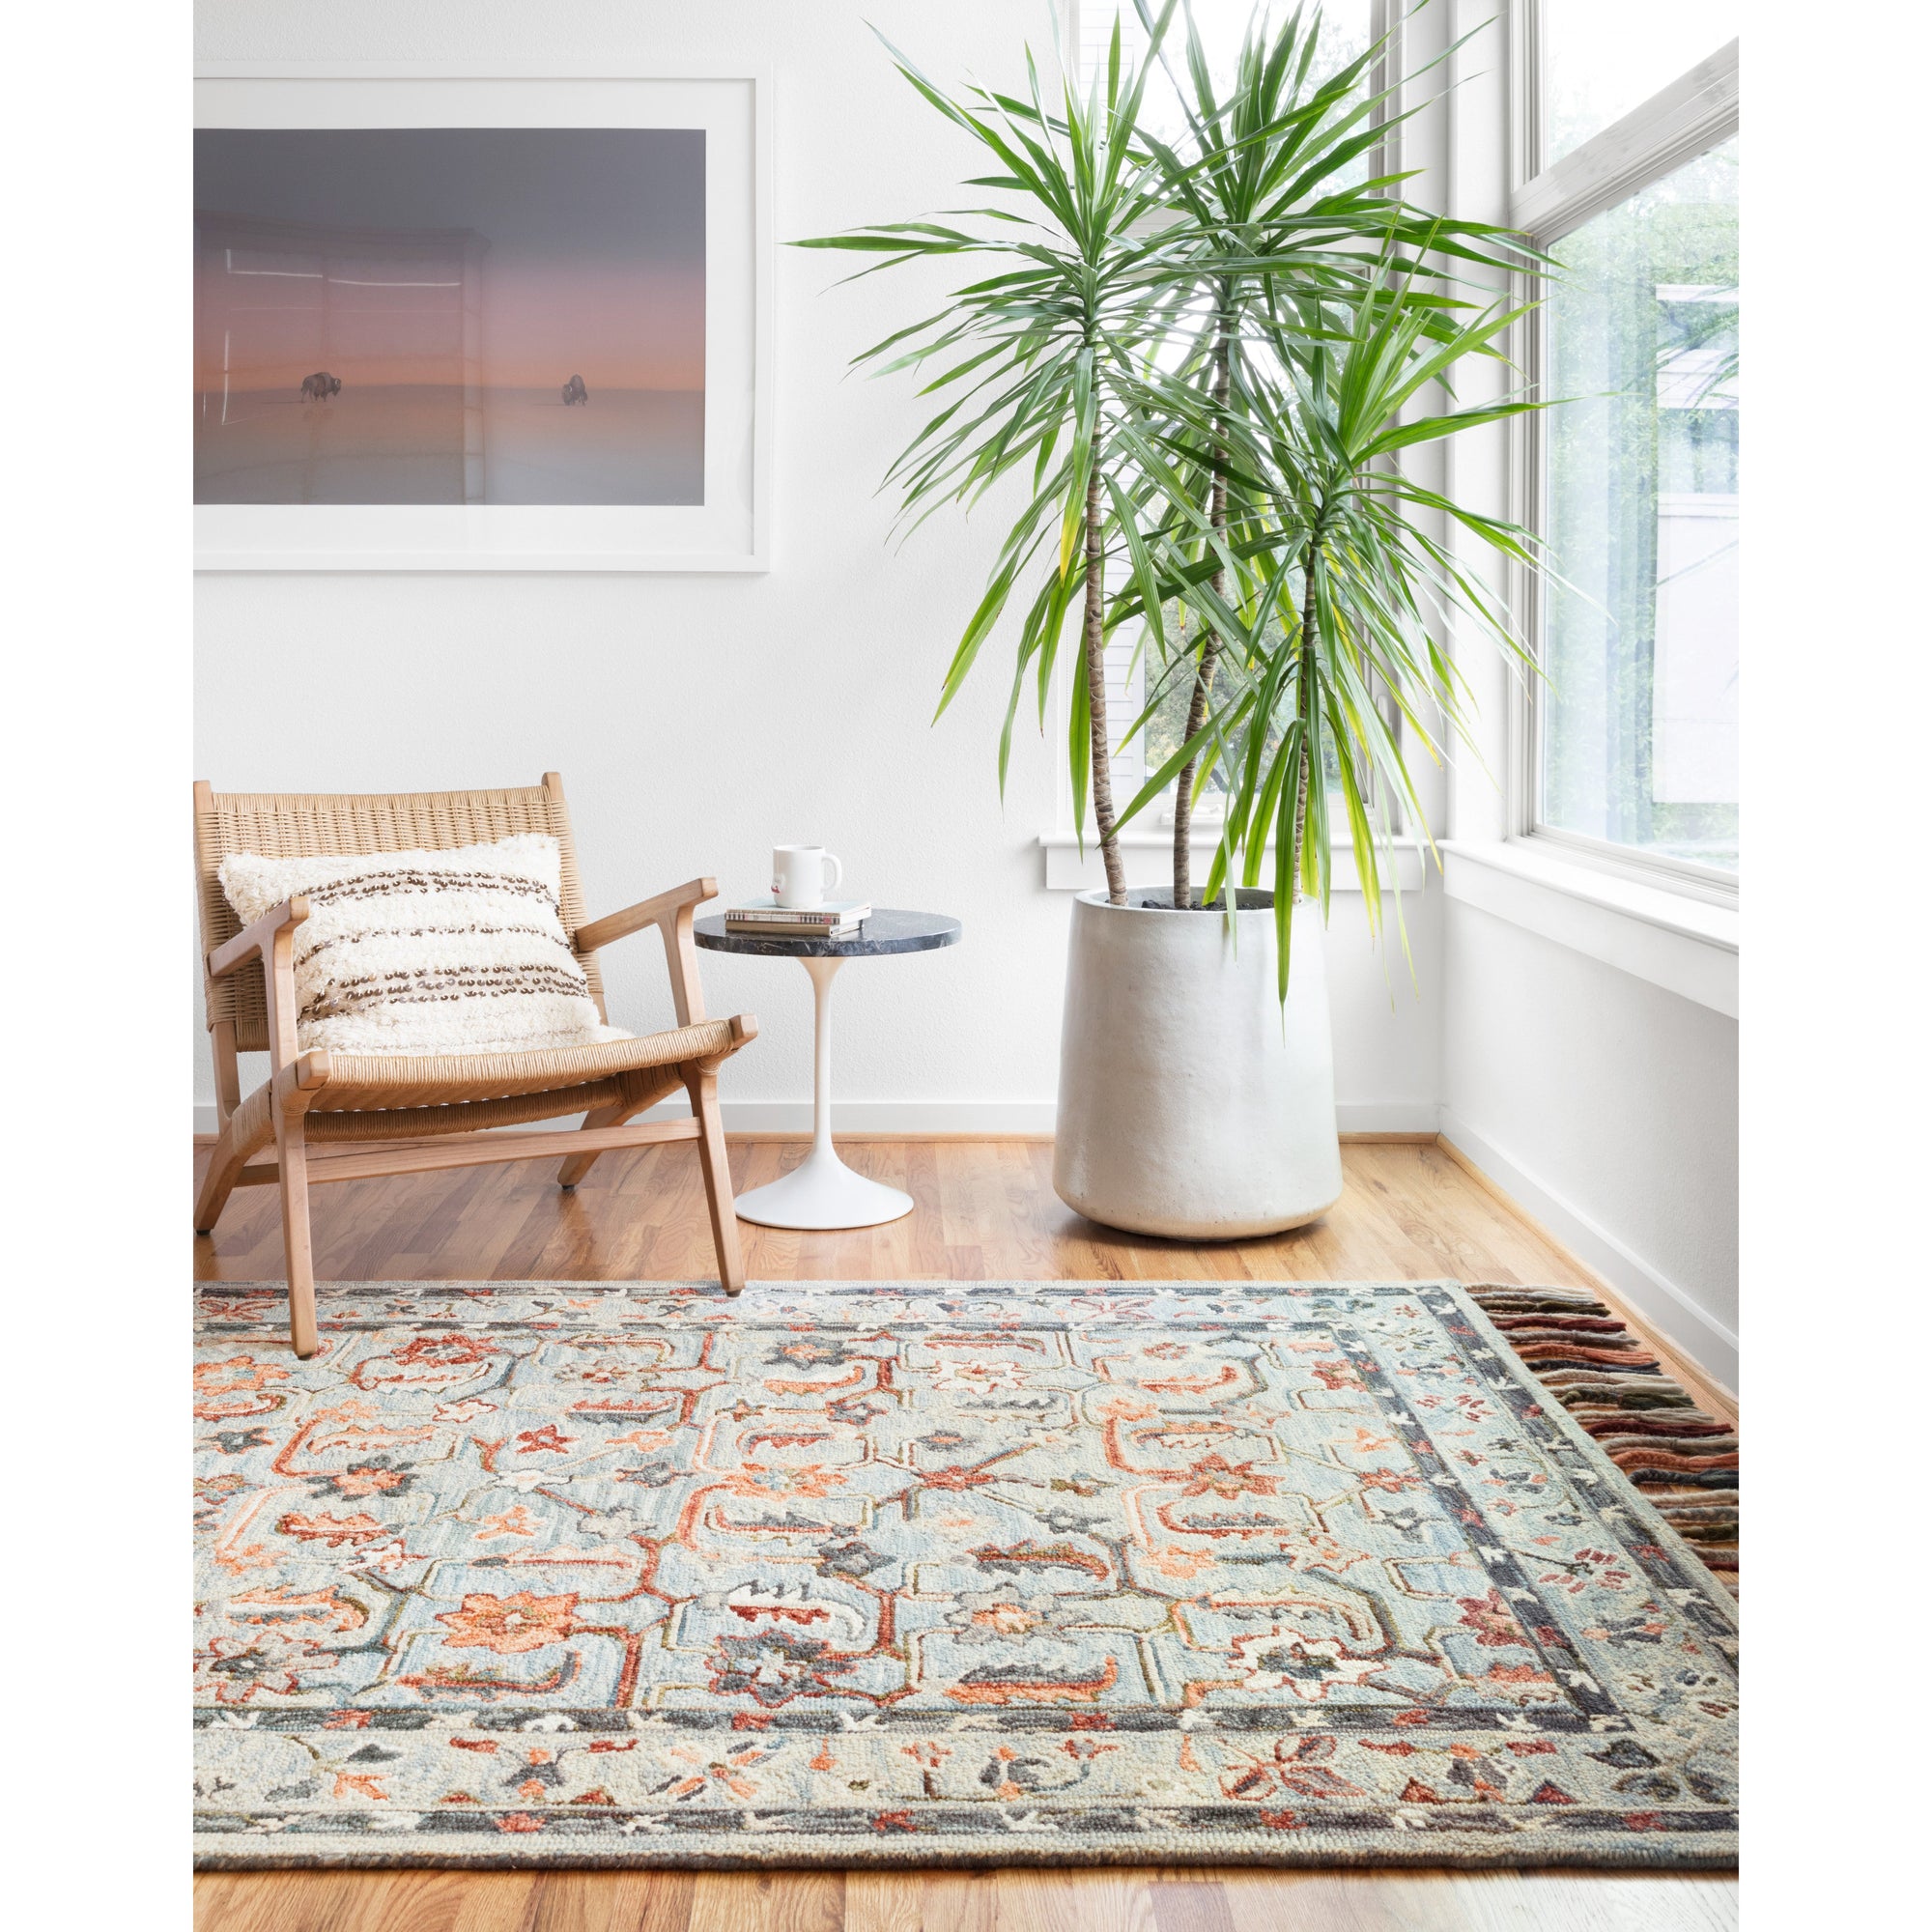 Rugs by Roo Loloi Elka Sky Multi Area Rug in size 18" x 18" Sample